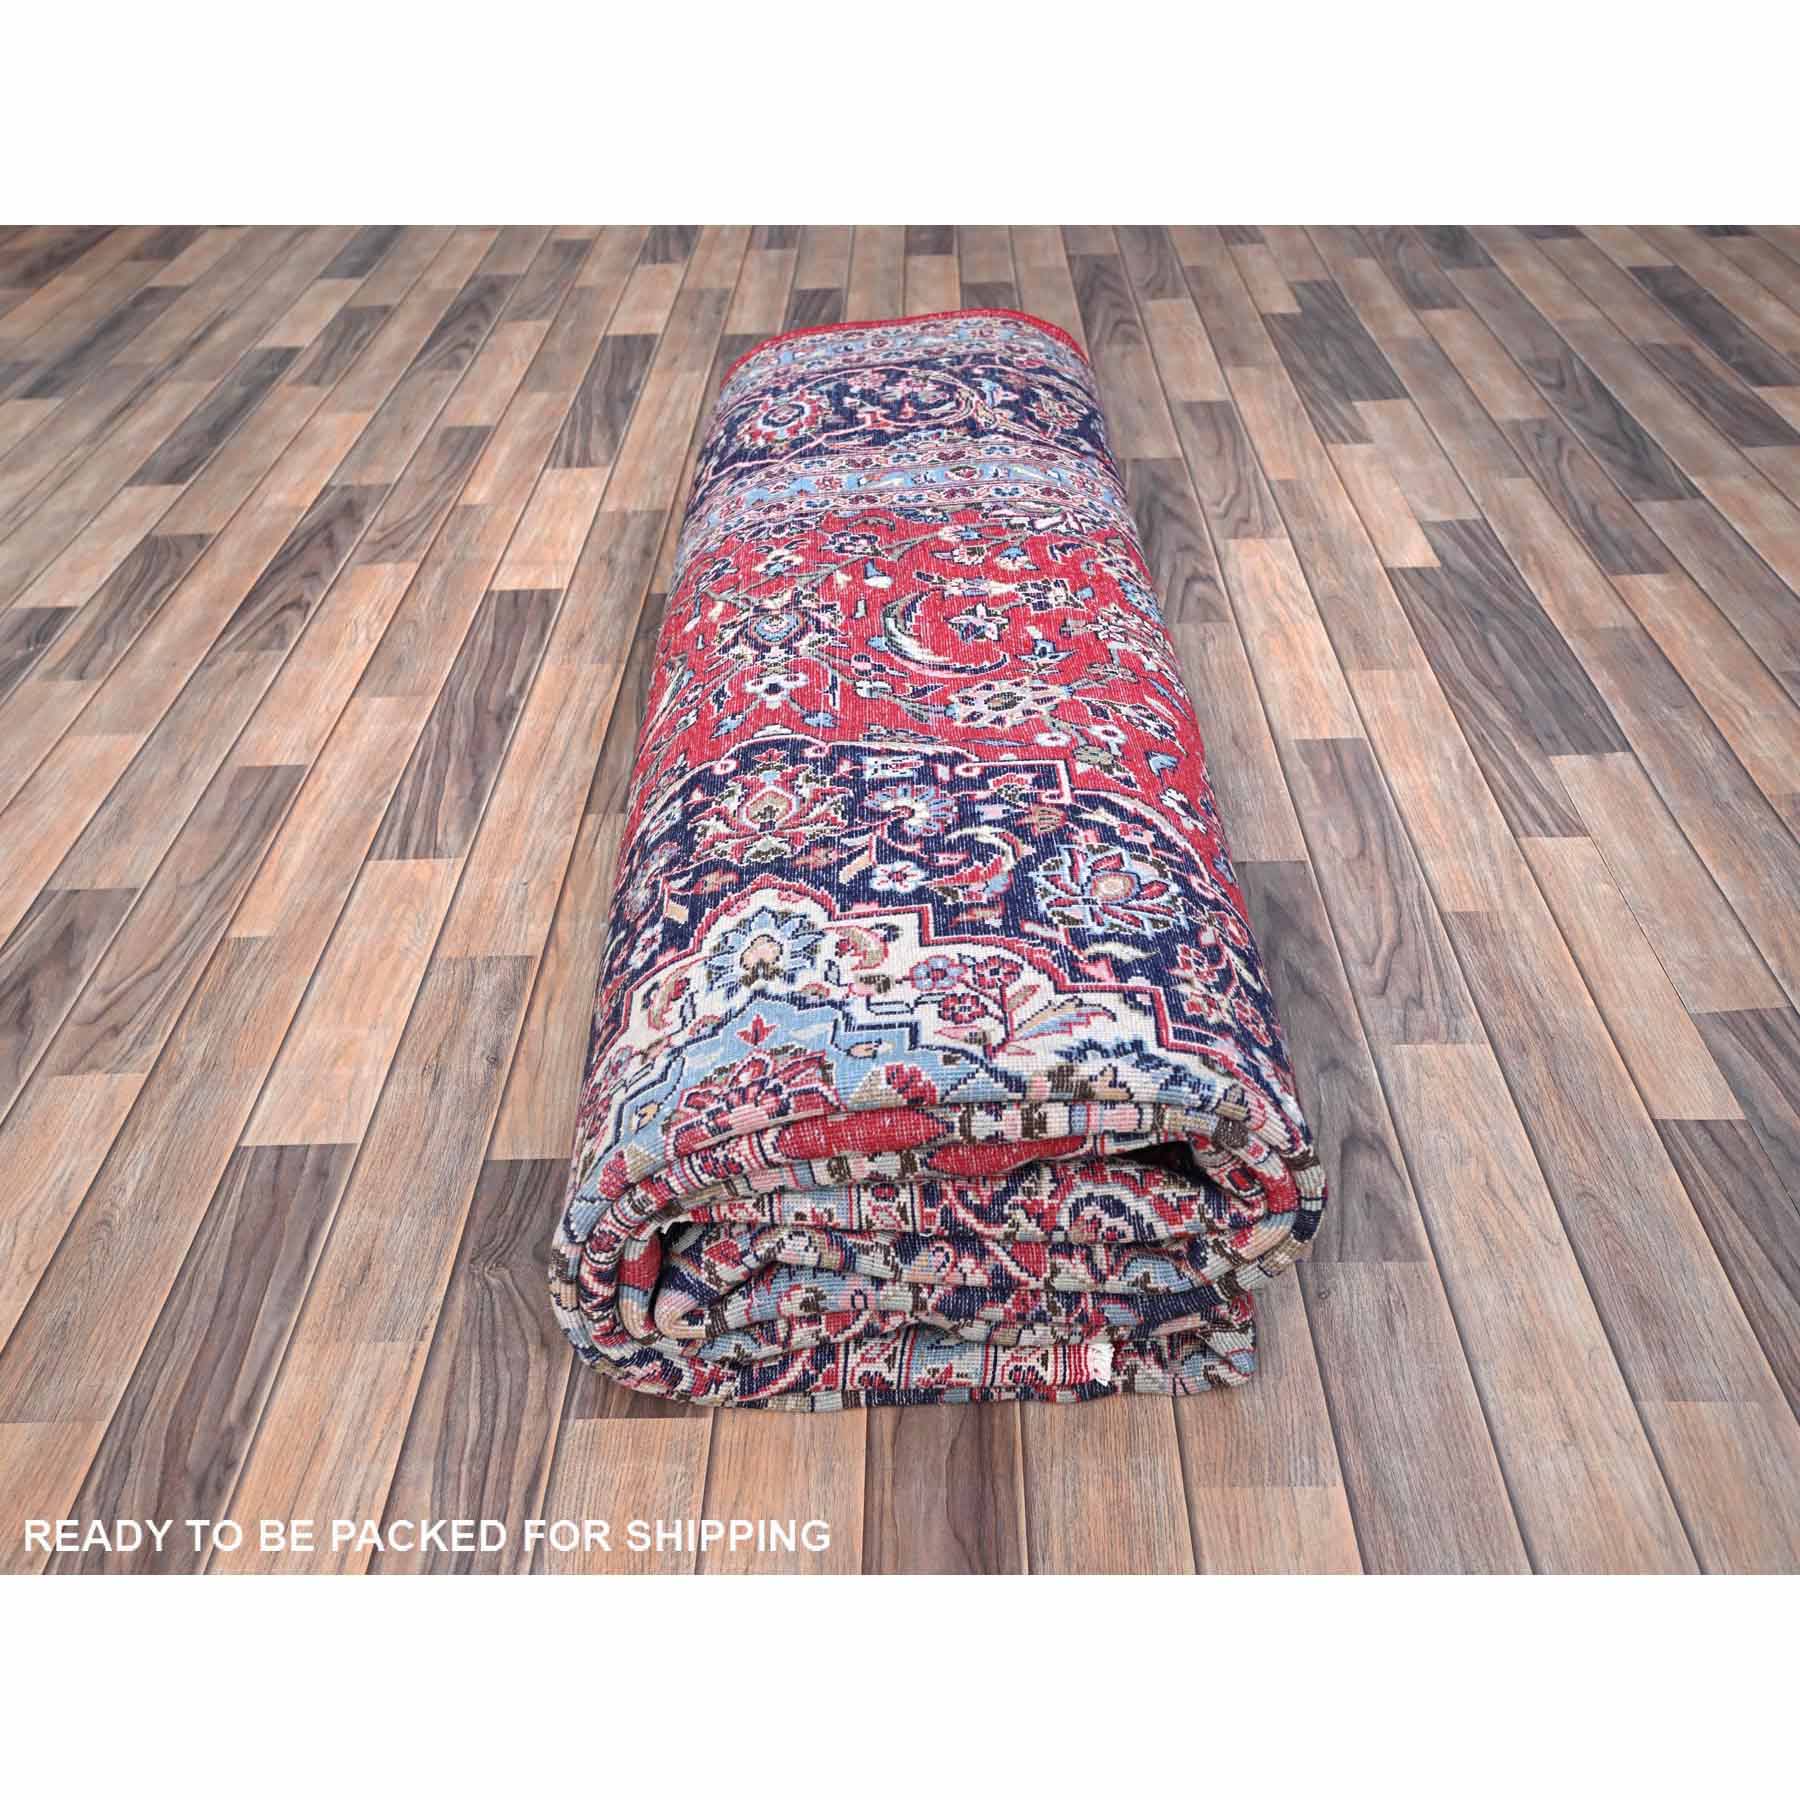 Persian-Hand-Knotted-Rug-433510